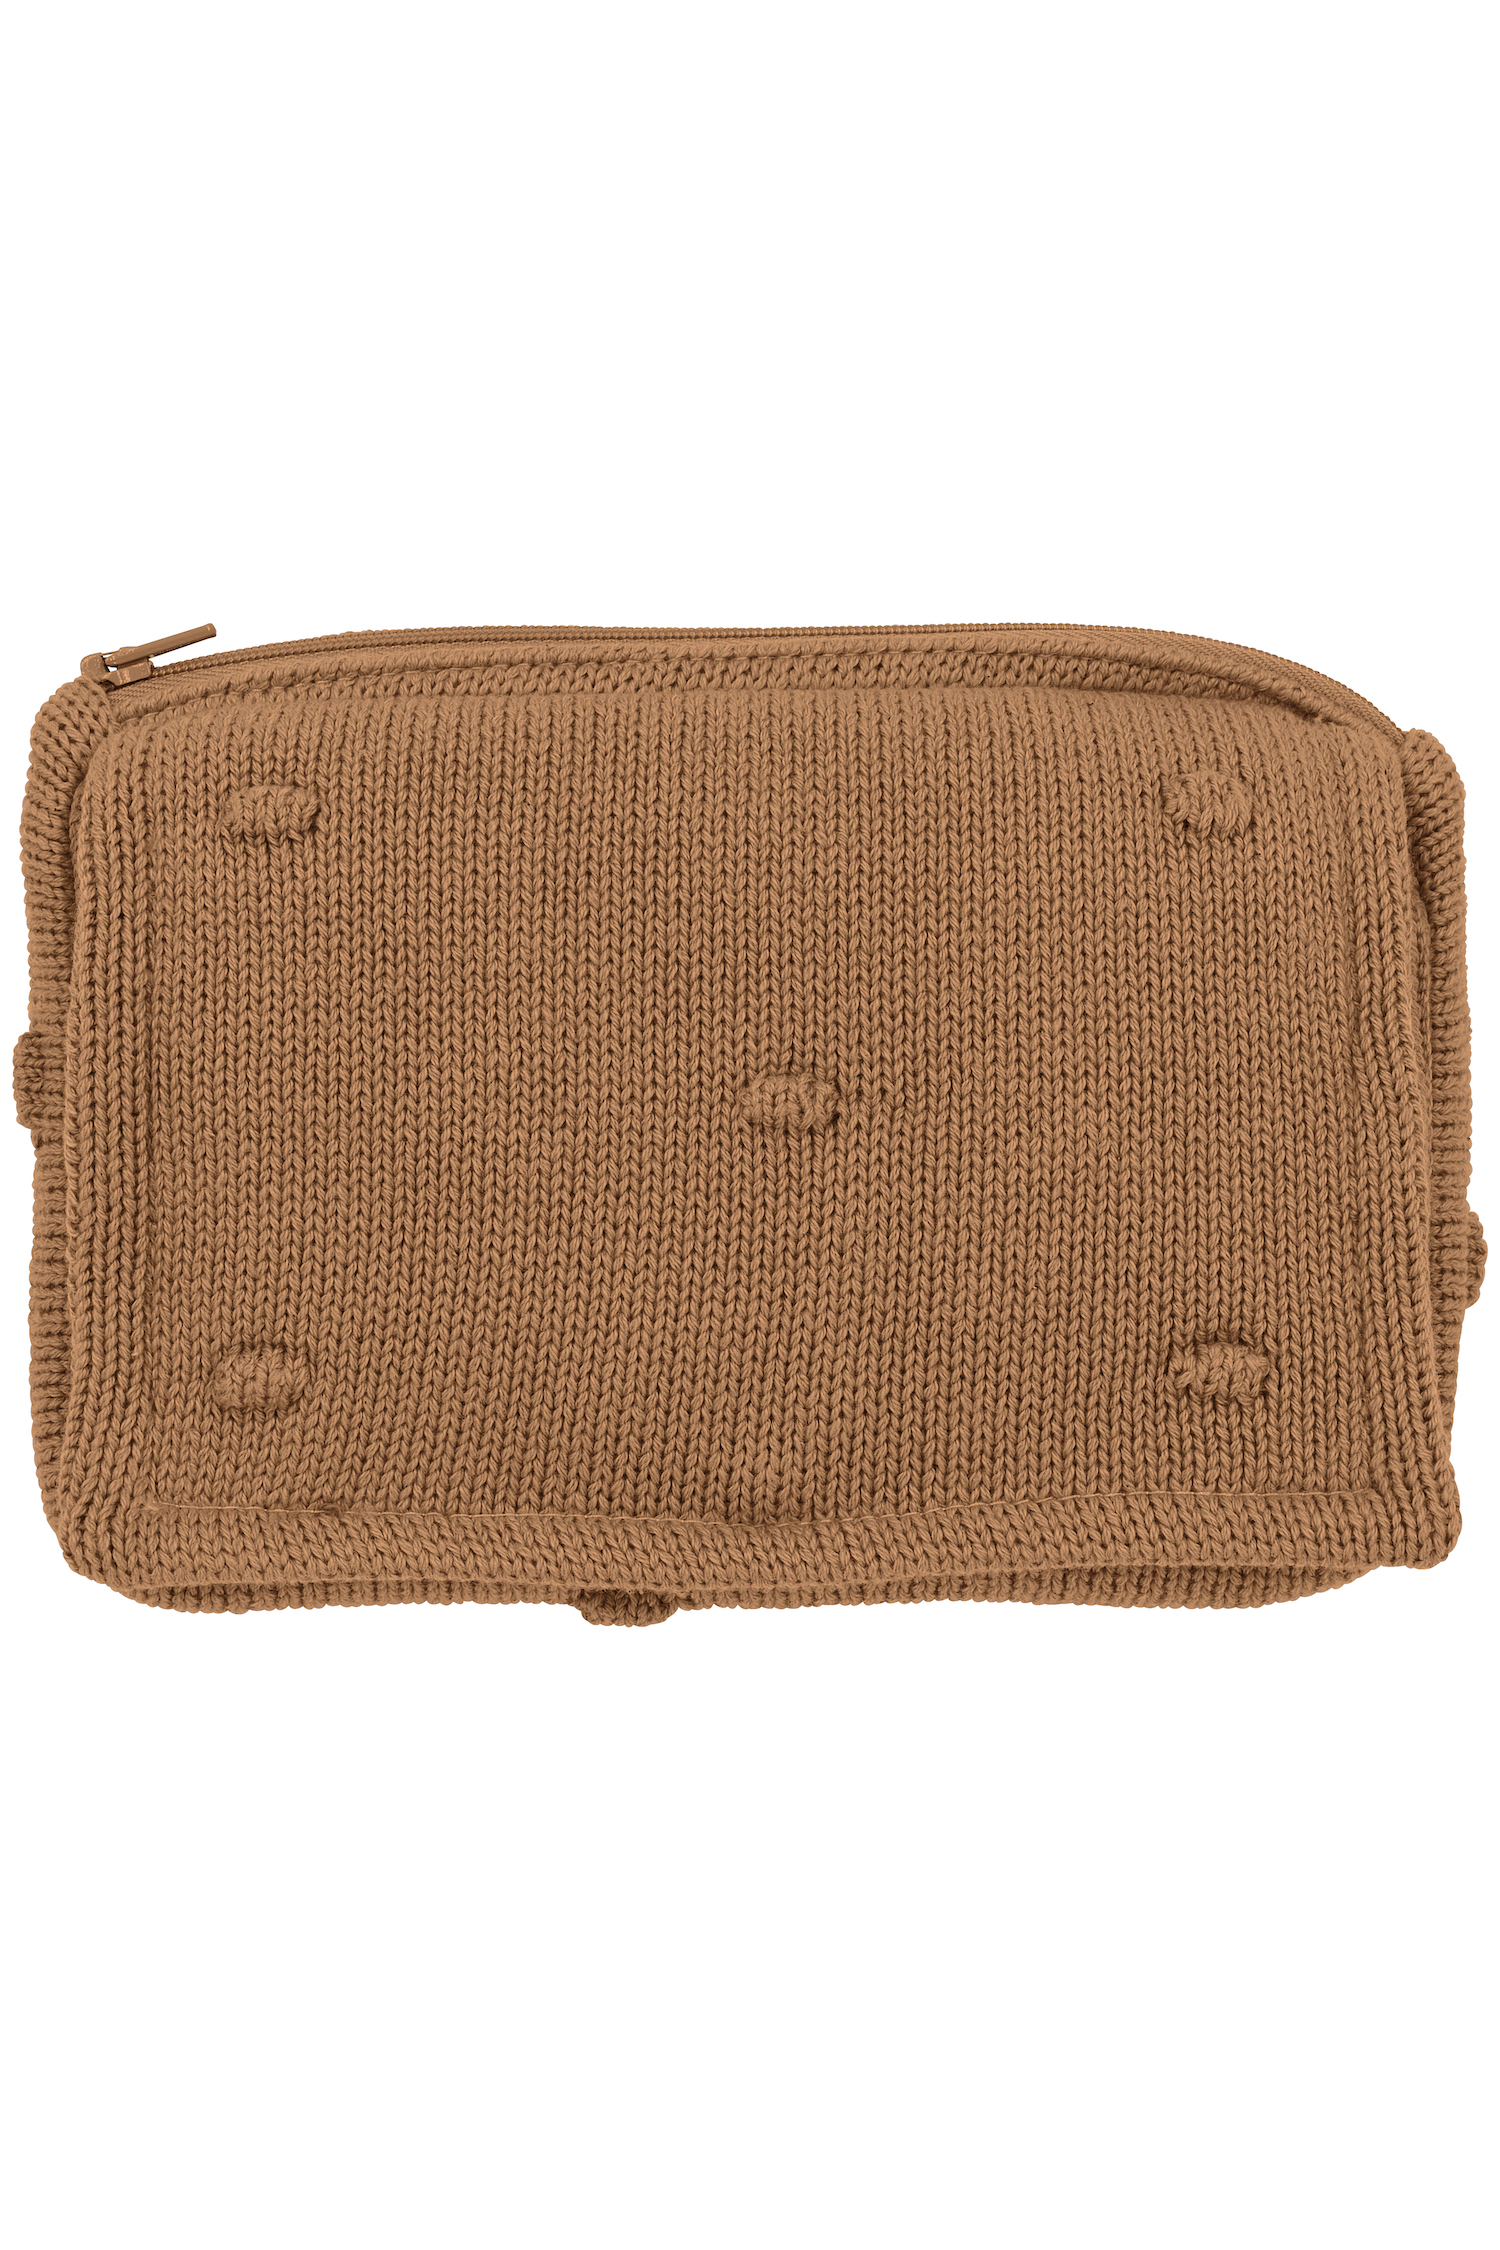 Knitted wipes pouch Mini Knots - Toffee